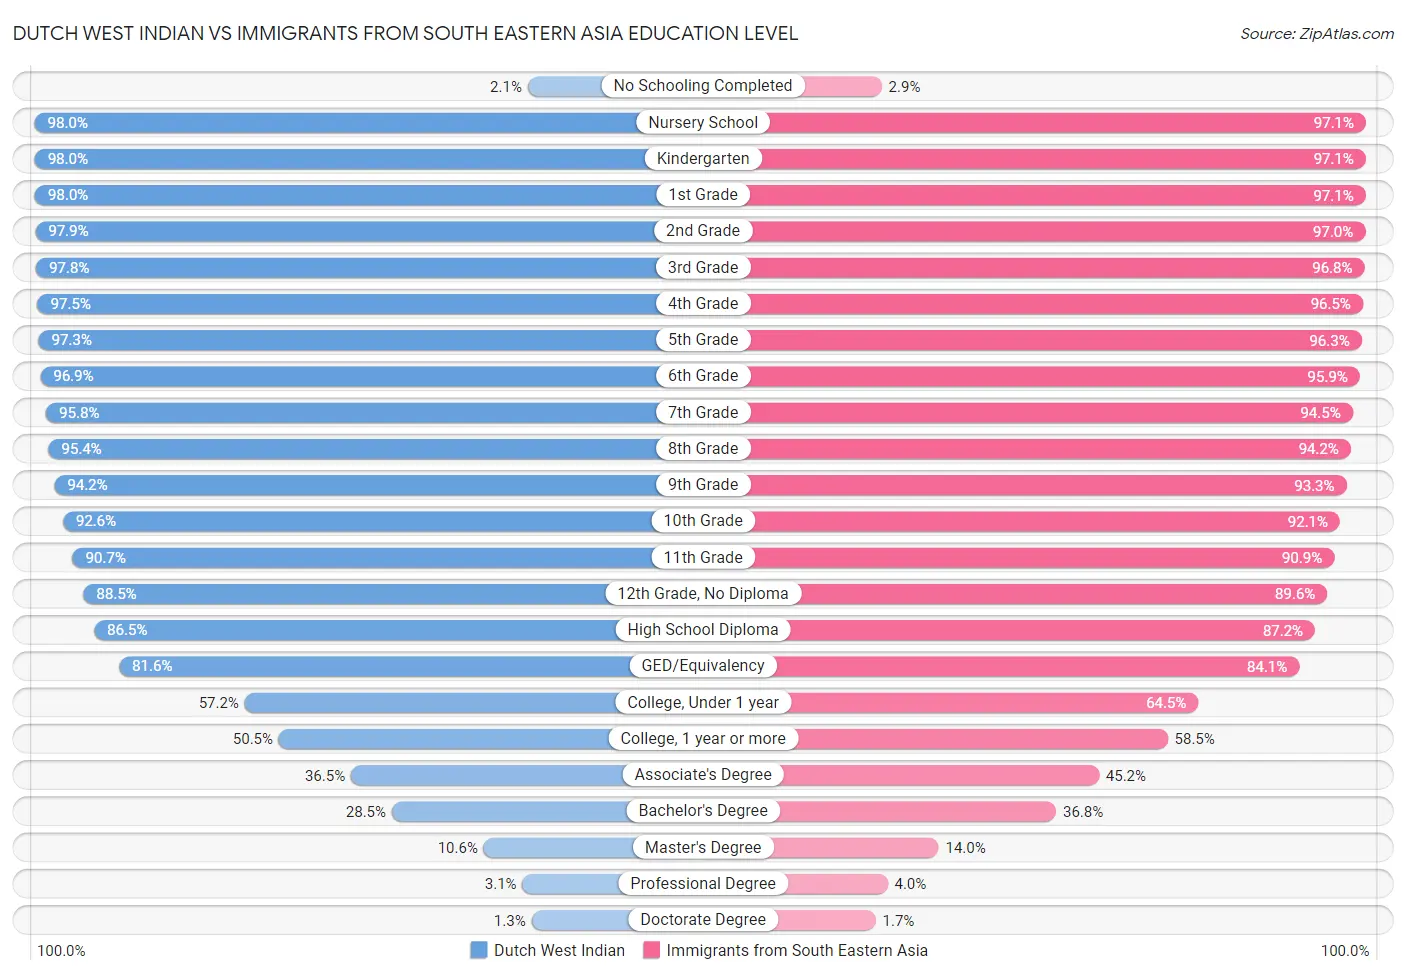 Dutch West Indian vs Immigrants from South Eastern Asia Education Level